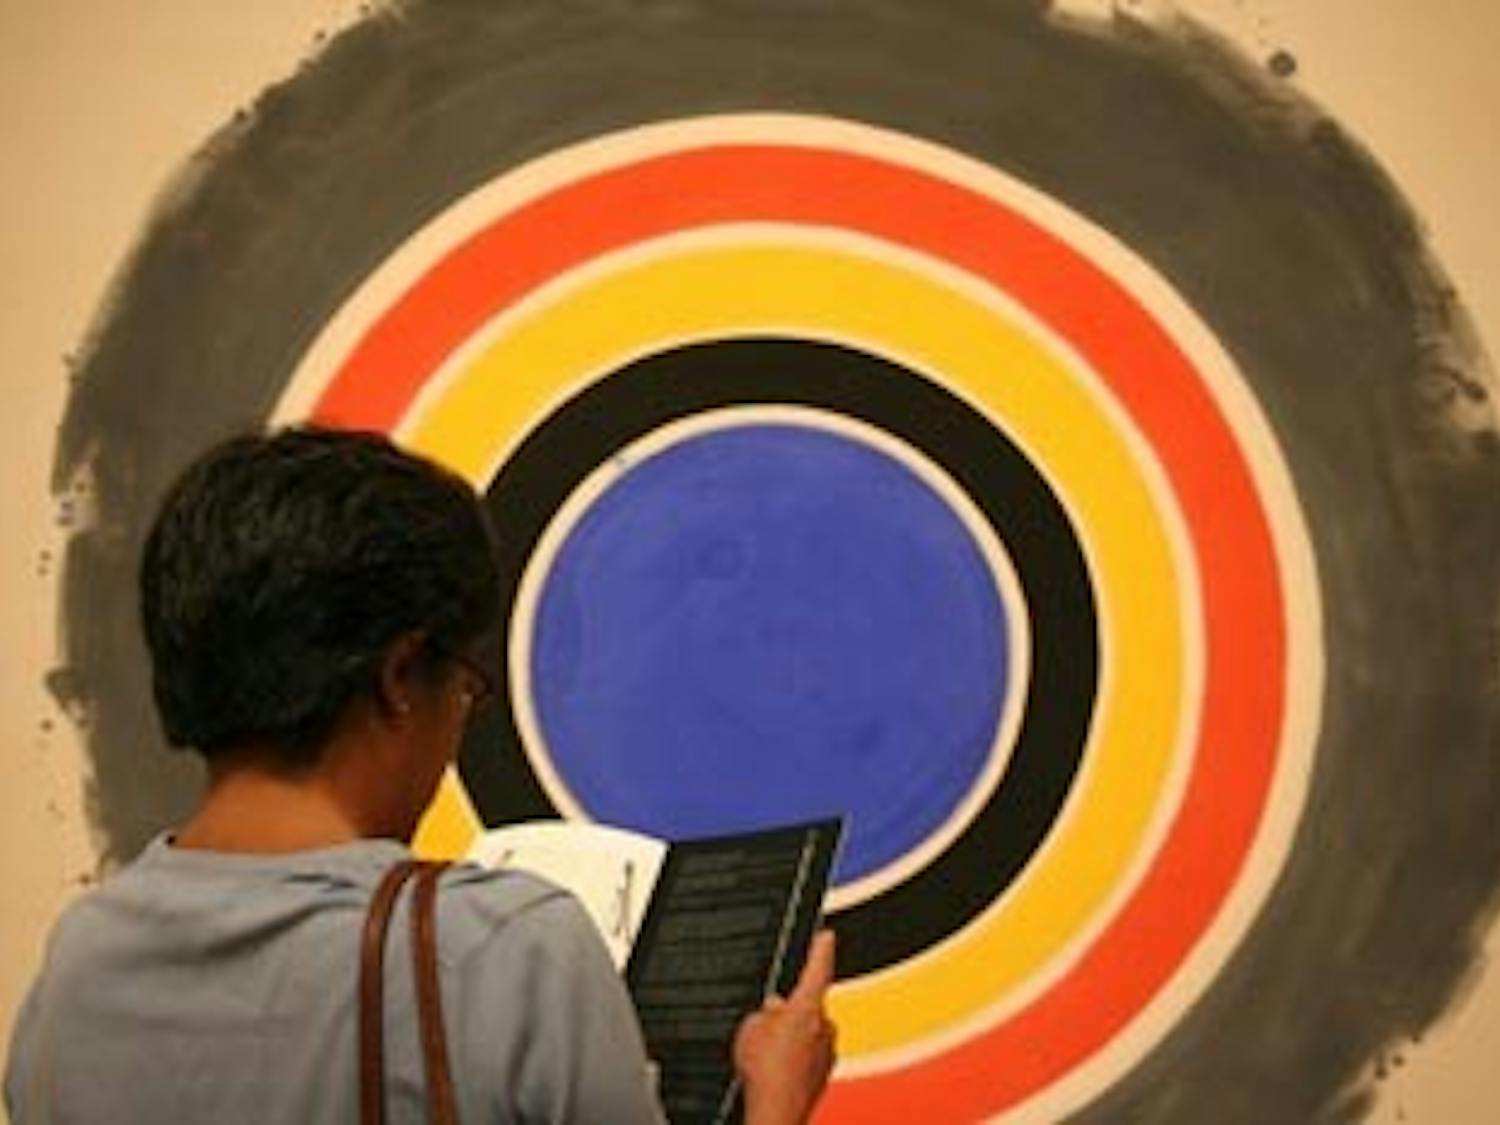 Anna Wu of Durham views the Kenneth Noland piece, "That," at the opening of the Circa 1958 exhibition at the Ackland.